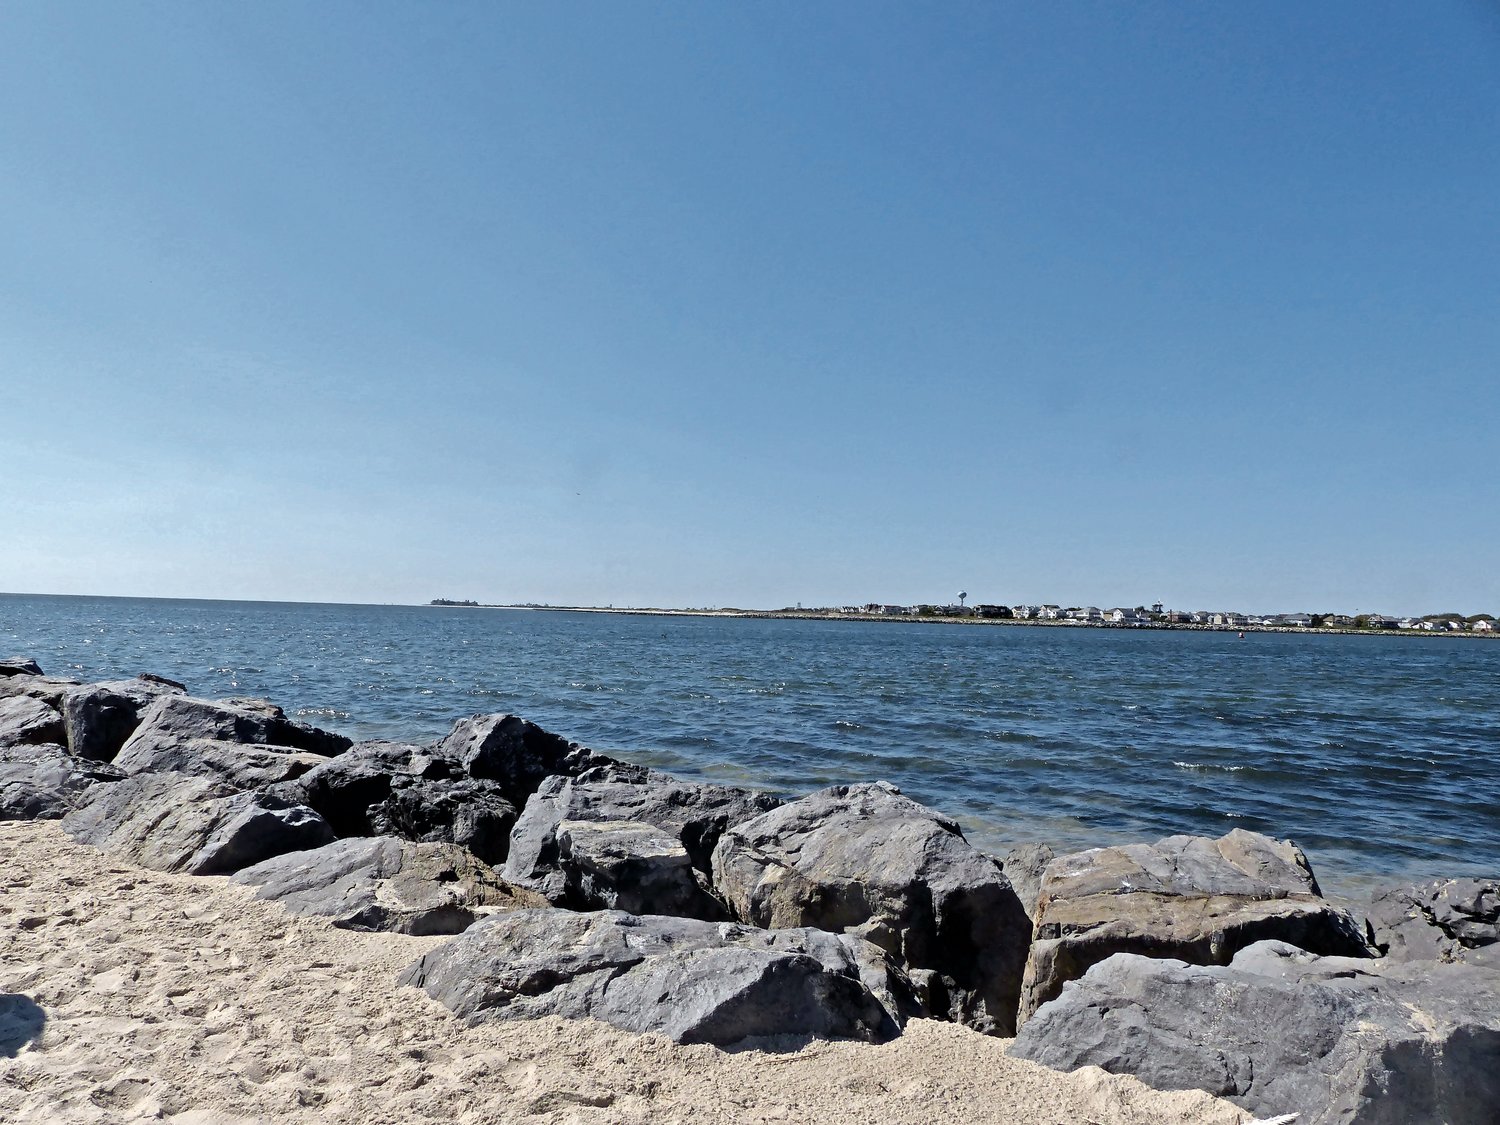 A view of Jones Beach Inlet and Point Lookout from Jones Beach’s West End jetty. All are a part of the South Shore Estuary Reserve.